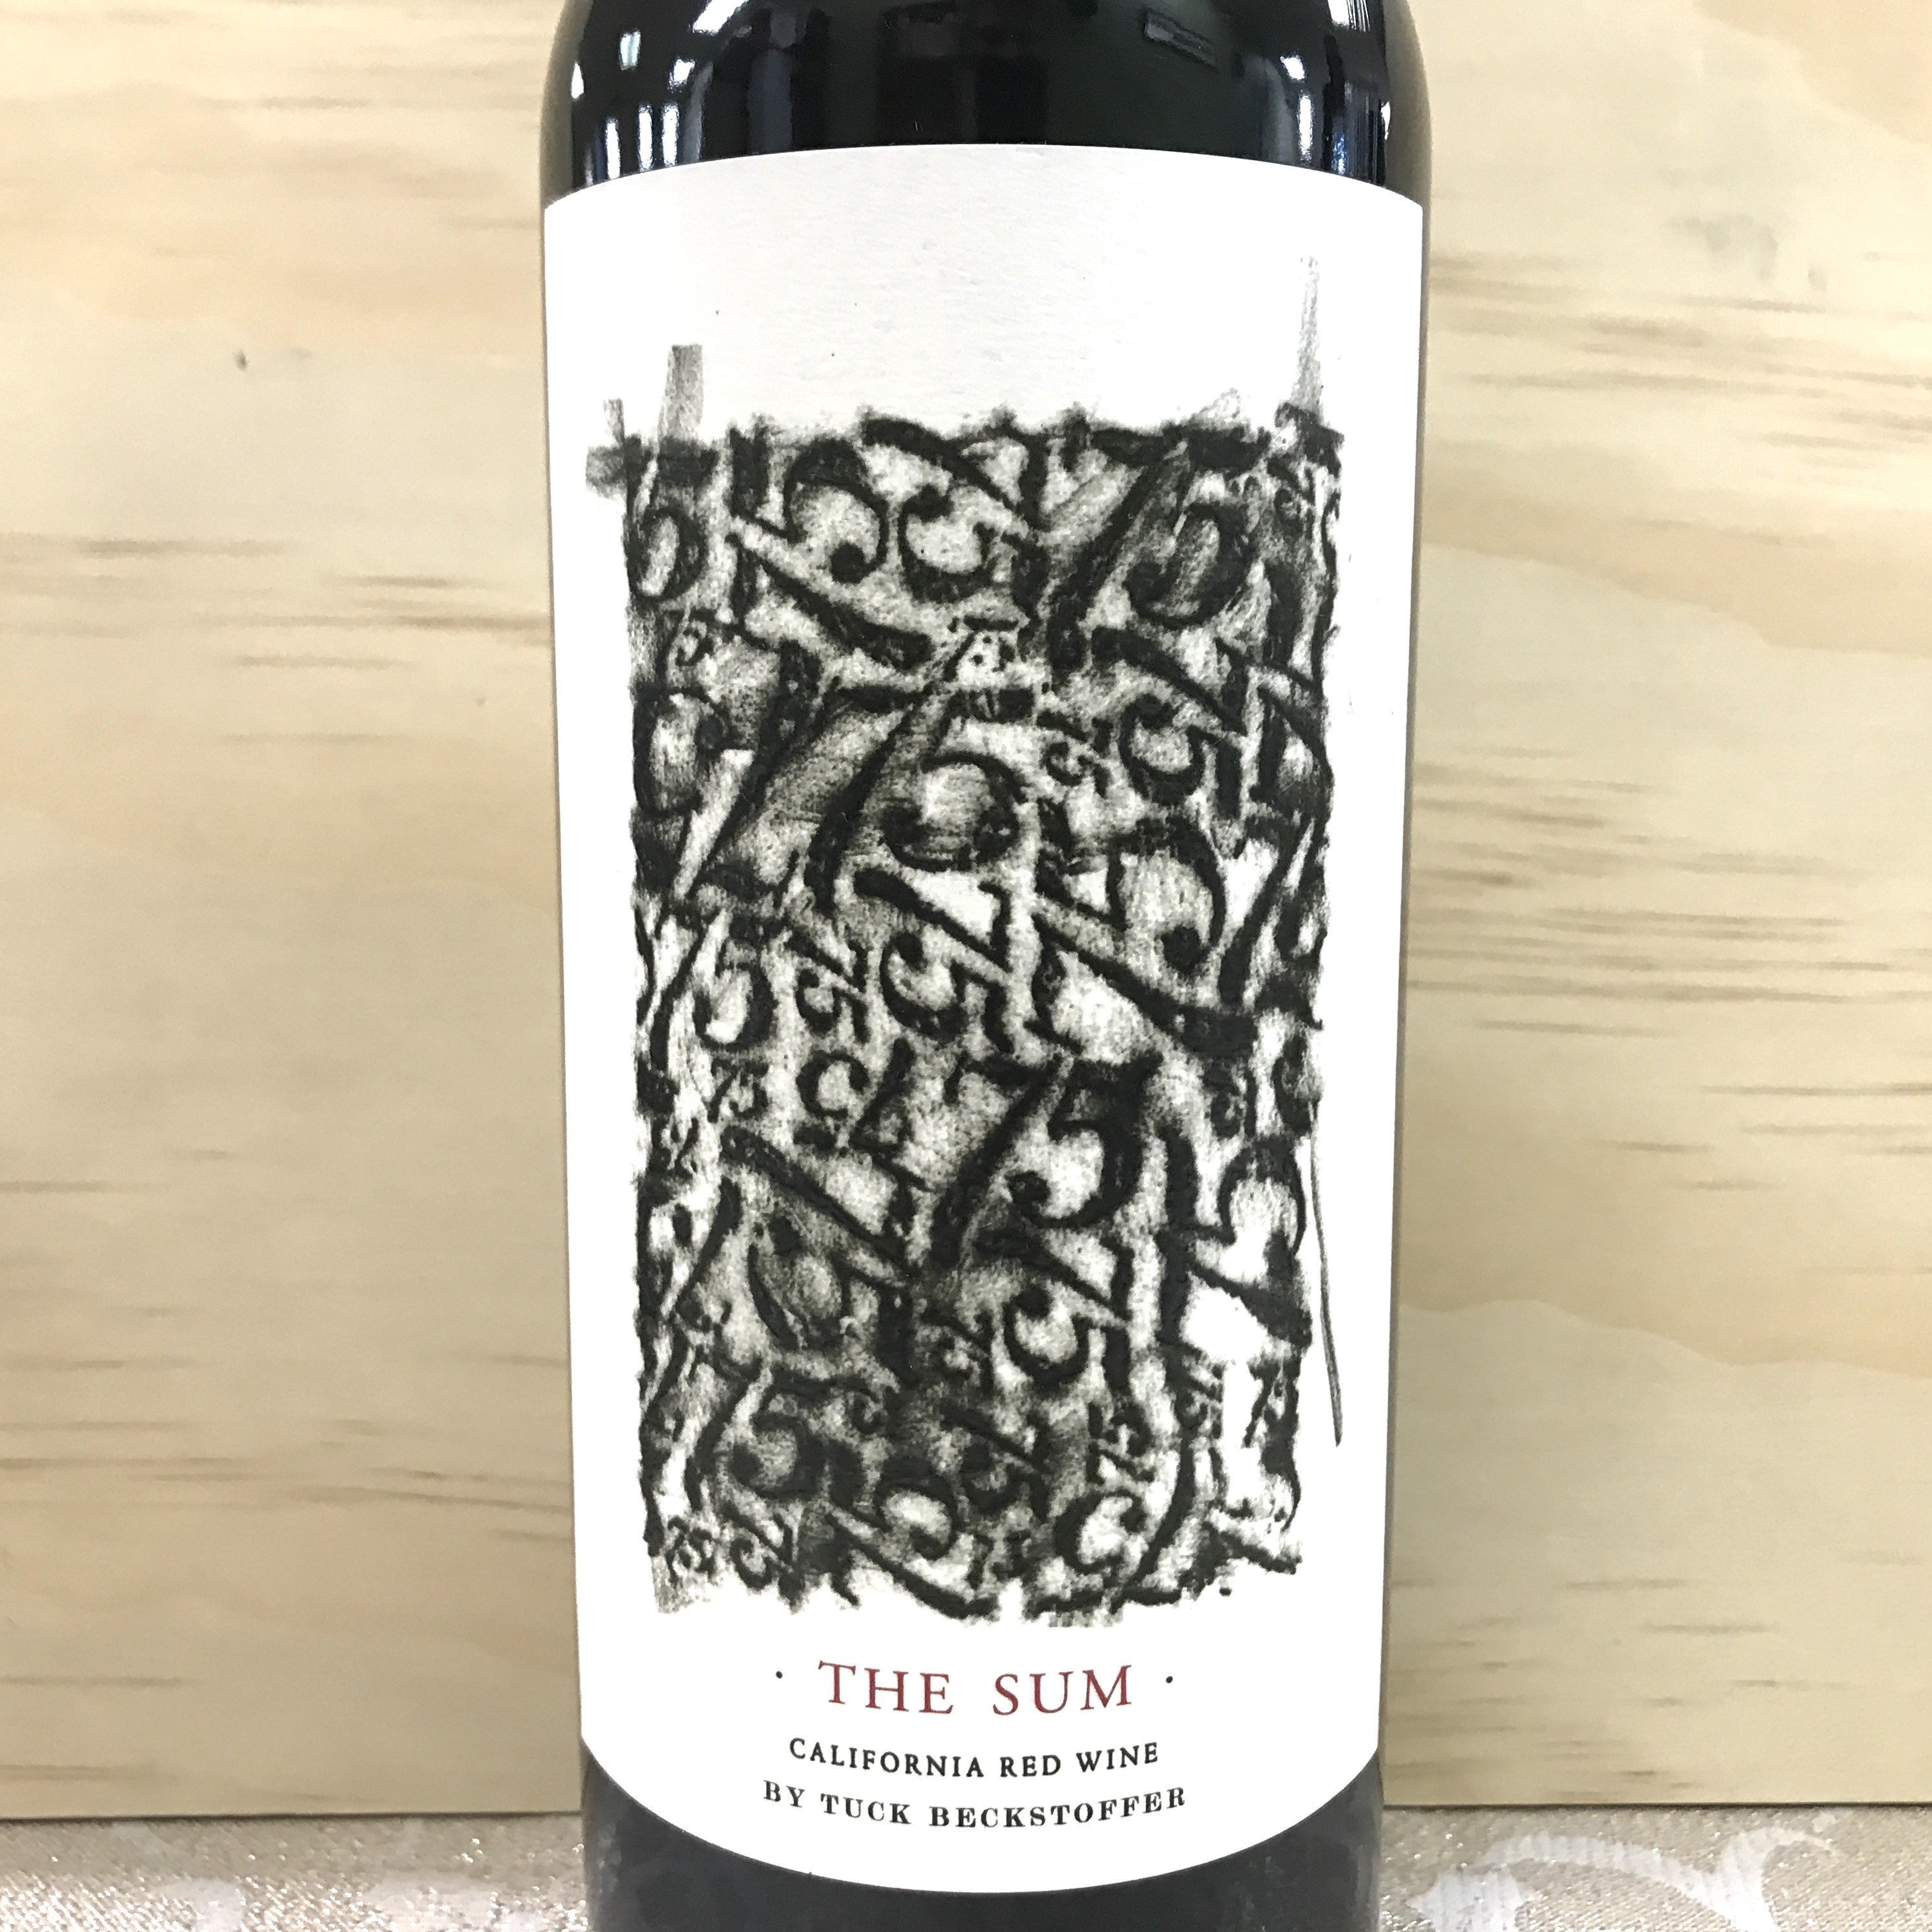 The Sum 75 California red wine by Tuck Beckstoffer 2019